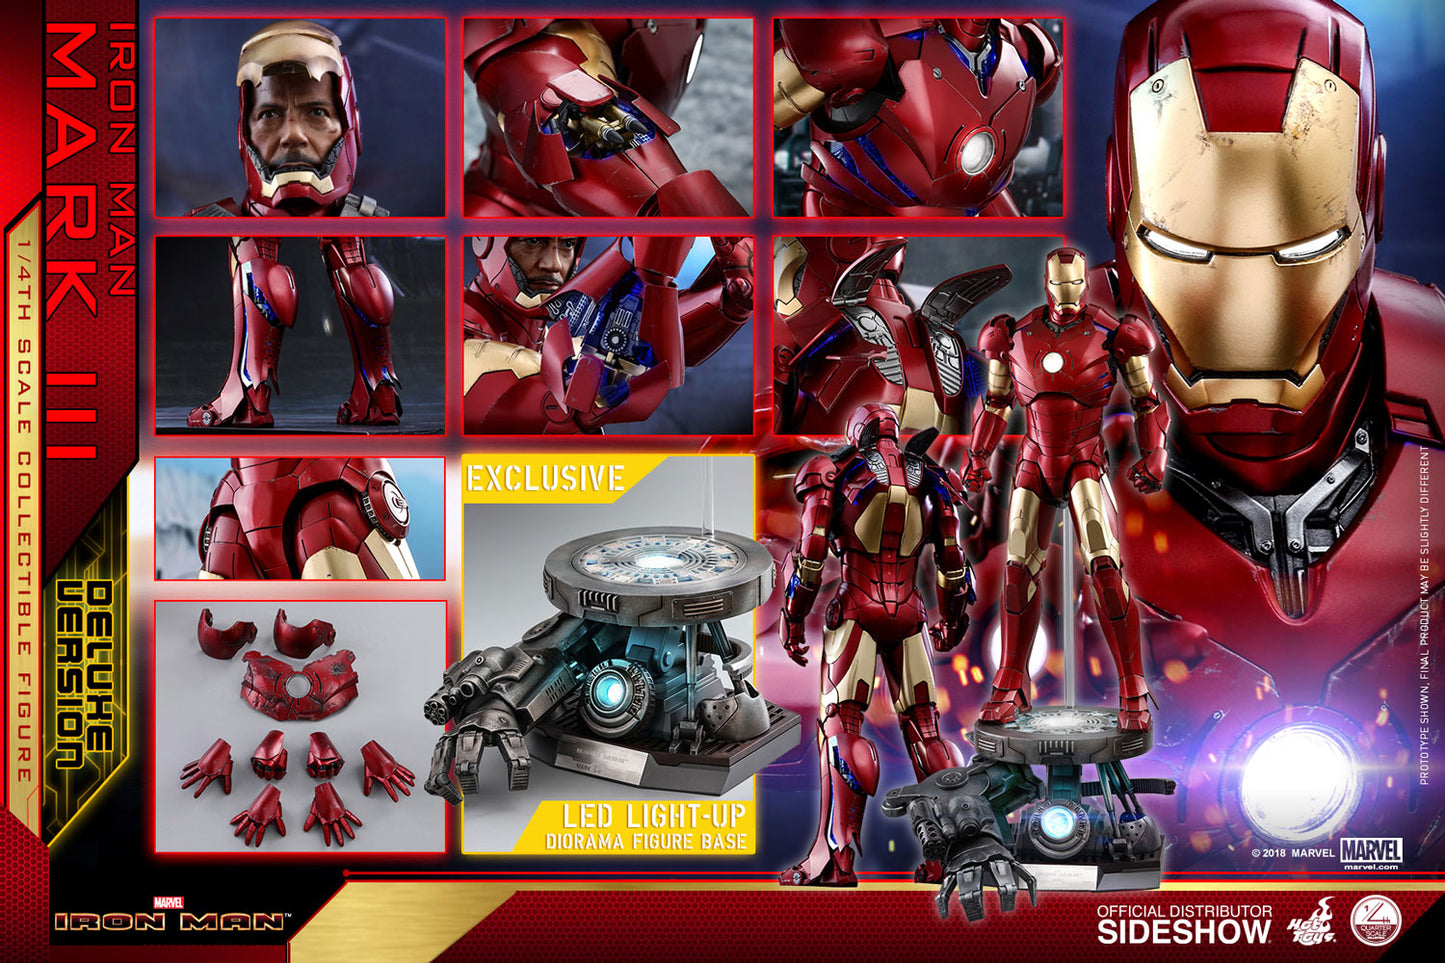 Iron Man Mark III Deluxe Version Quarter Scale Figure by Hot Toys